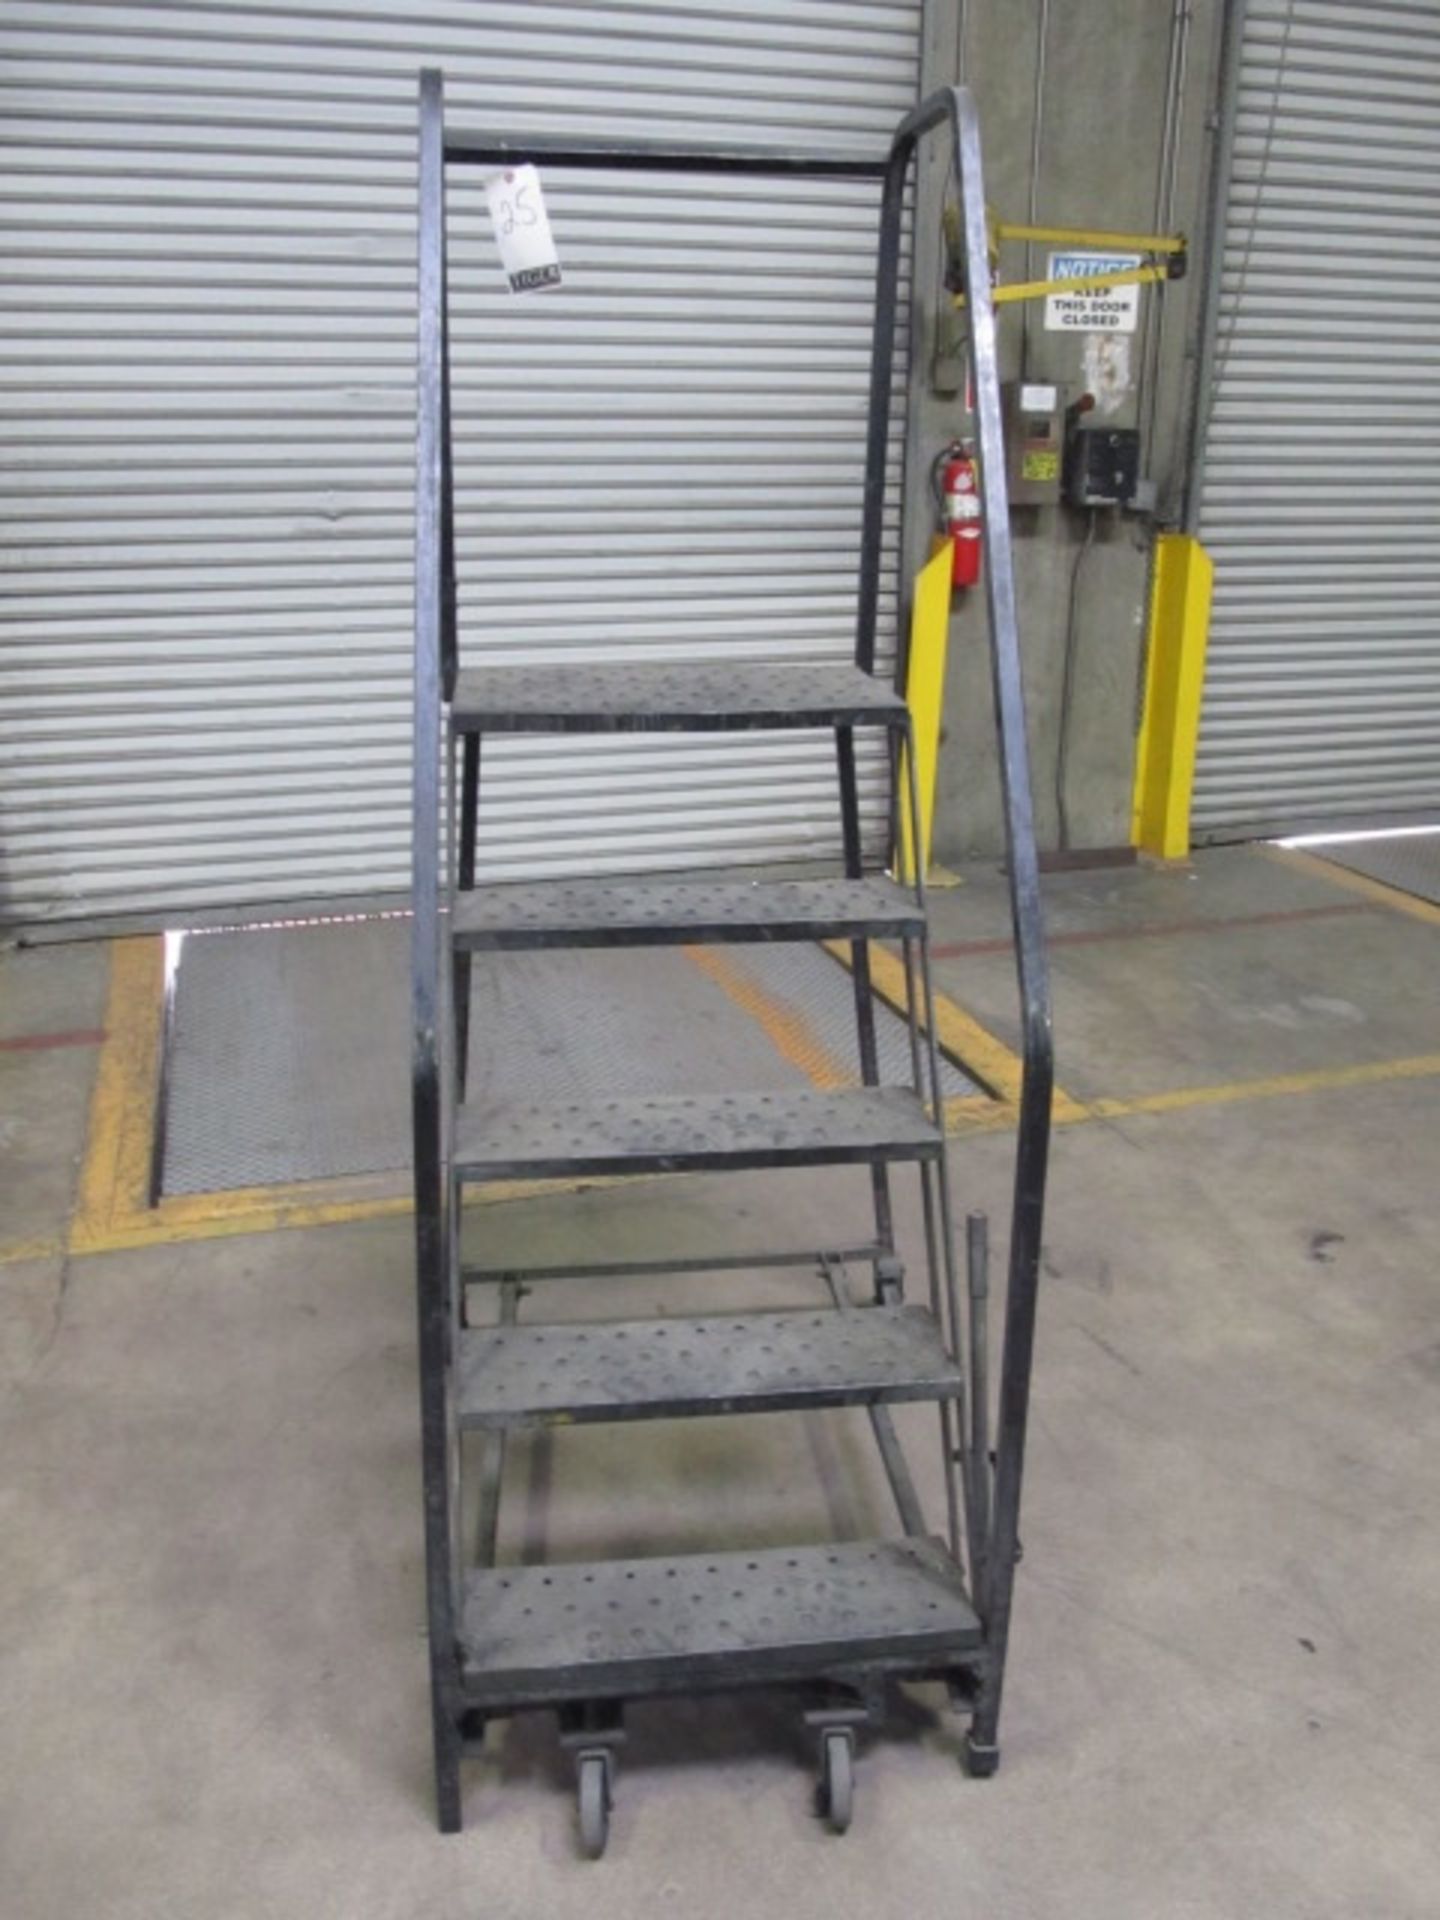 Cotterman 300lb Capacity 5 Step Rolling Staircase. Asset Location: West Warehouse, Site Location: